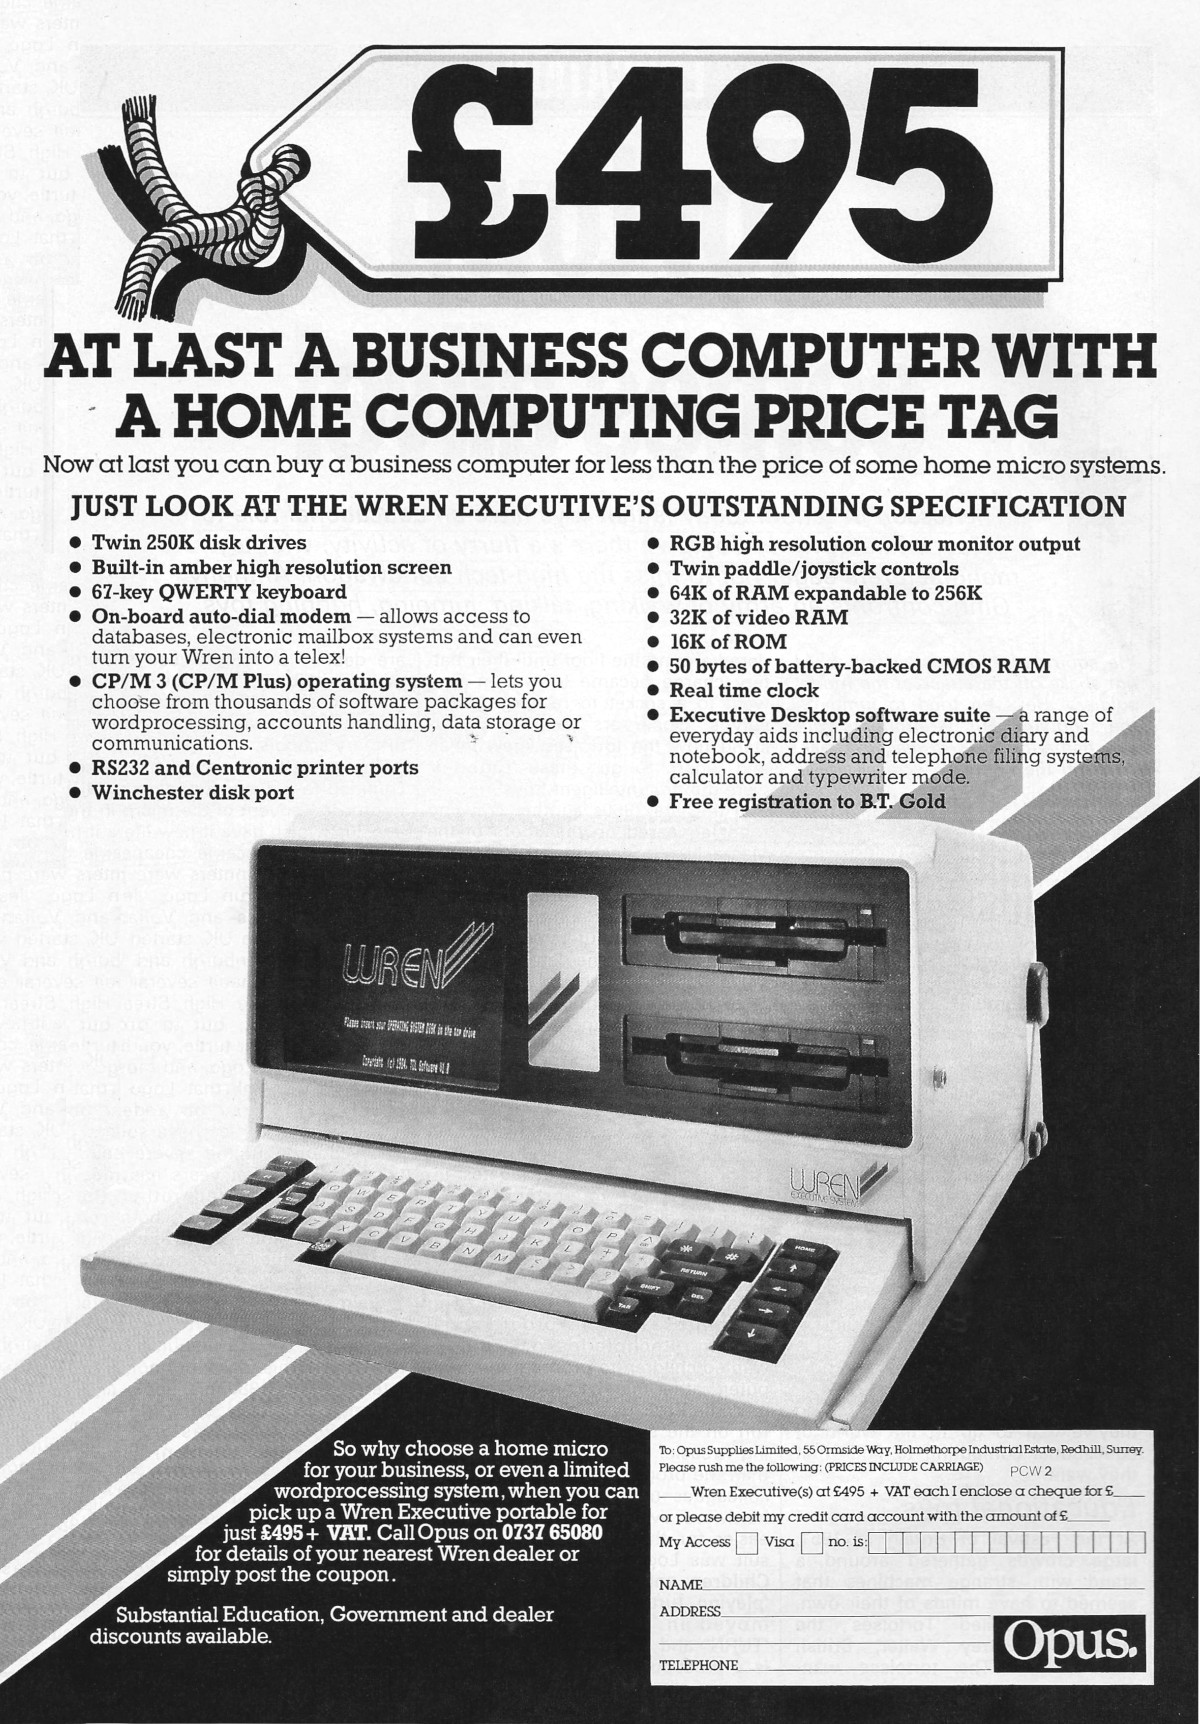 An Opus advert for the Wren Executive - possibly built from left-over parts, and notable for the fact it's now less than half the price at £495 + VAT, or about £1,930 in 2024. From Personal Computer World, May 1986